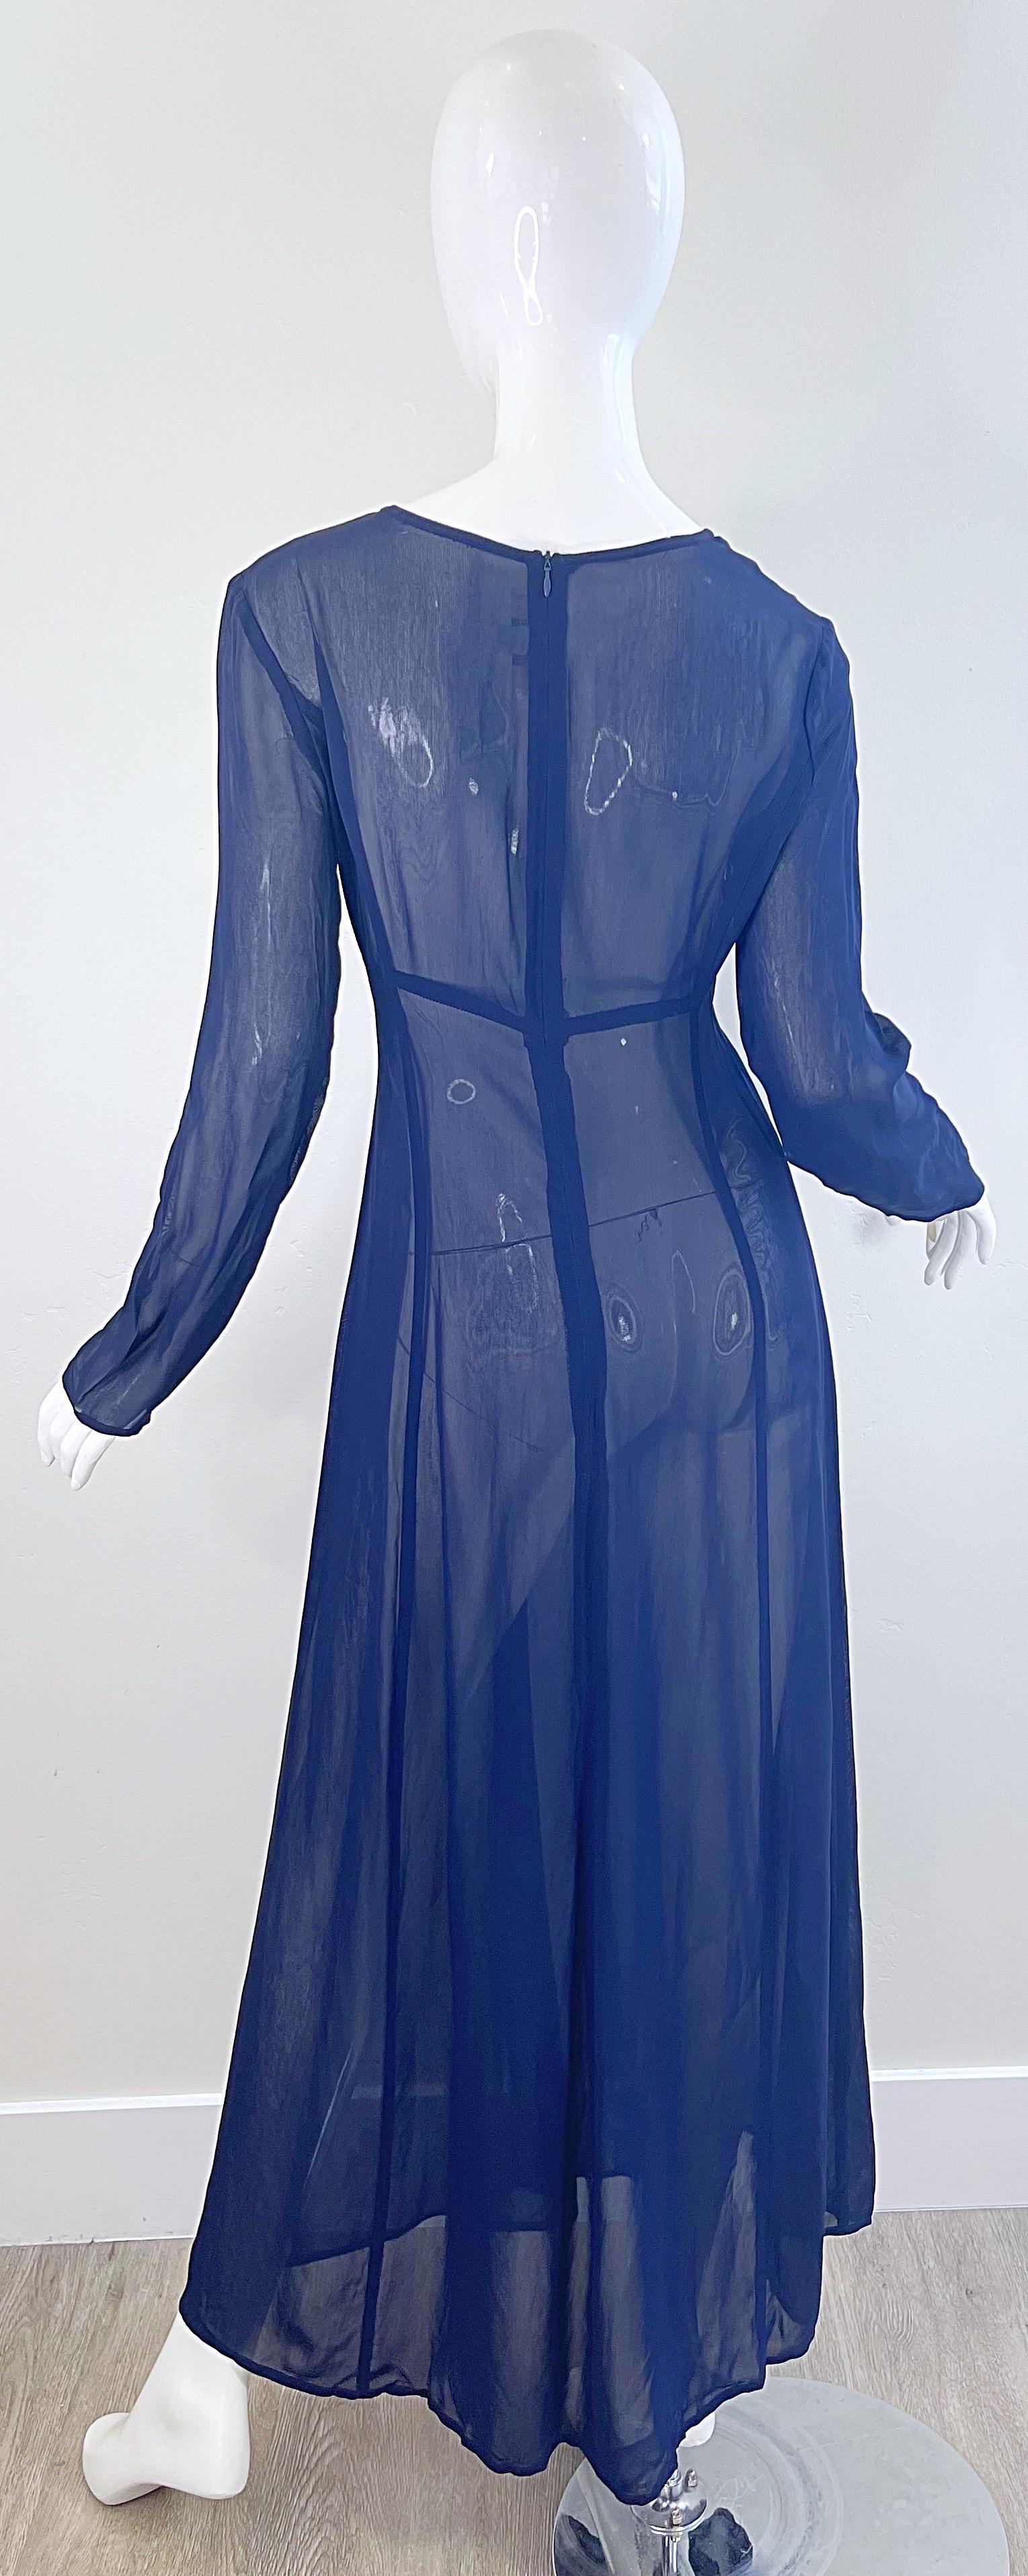 NWT 1990s I Magnin Size 10 Sheer Navy Blue Long Sleeve Vintage 90s Maxi Dress For Sale 9